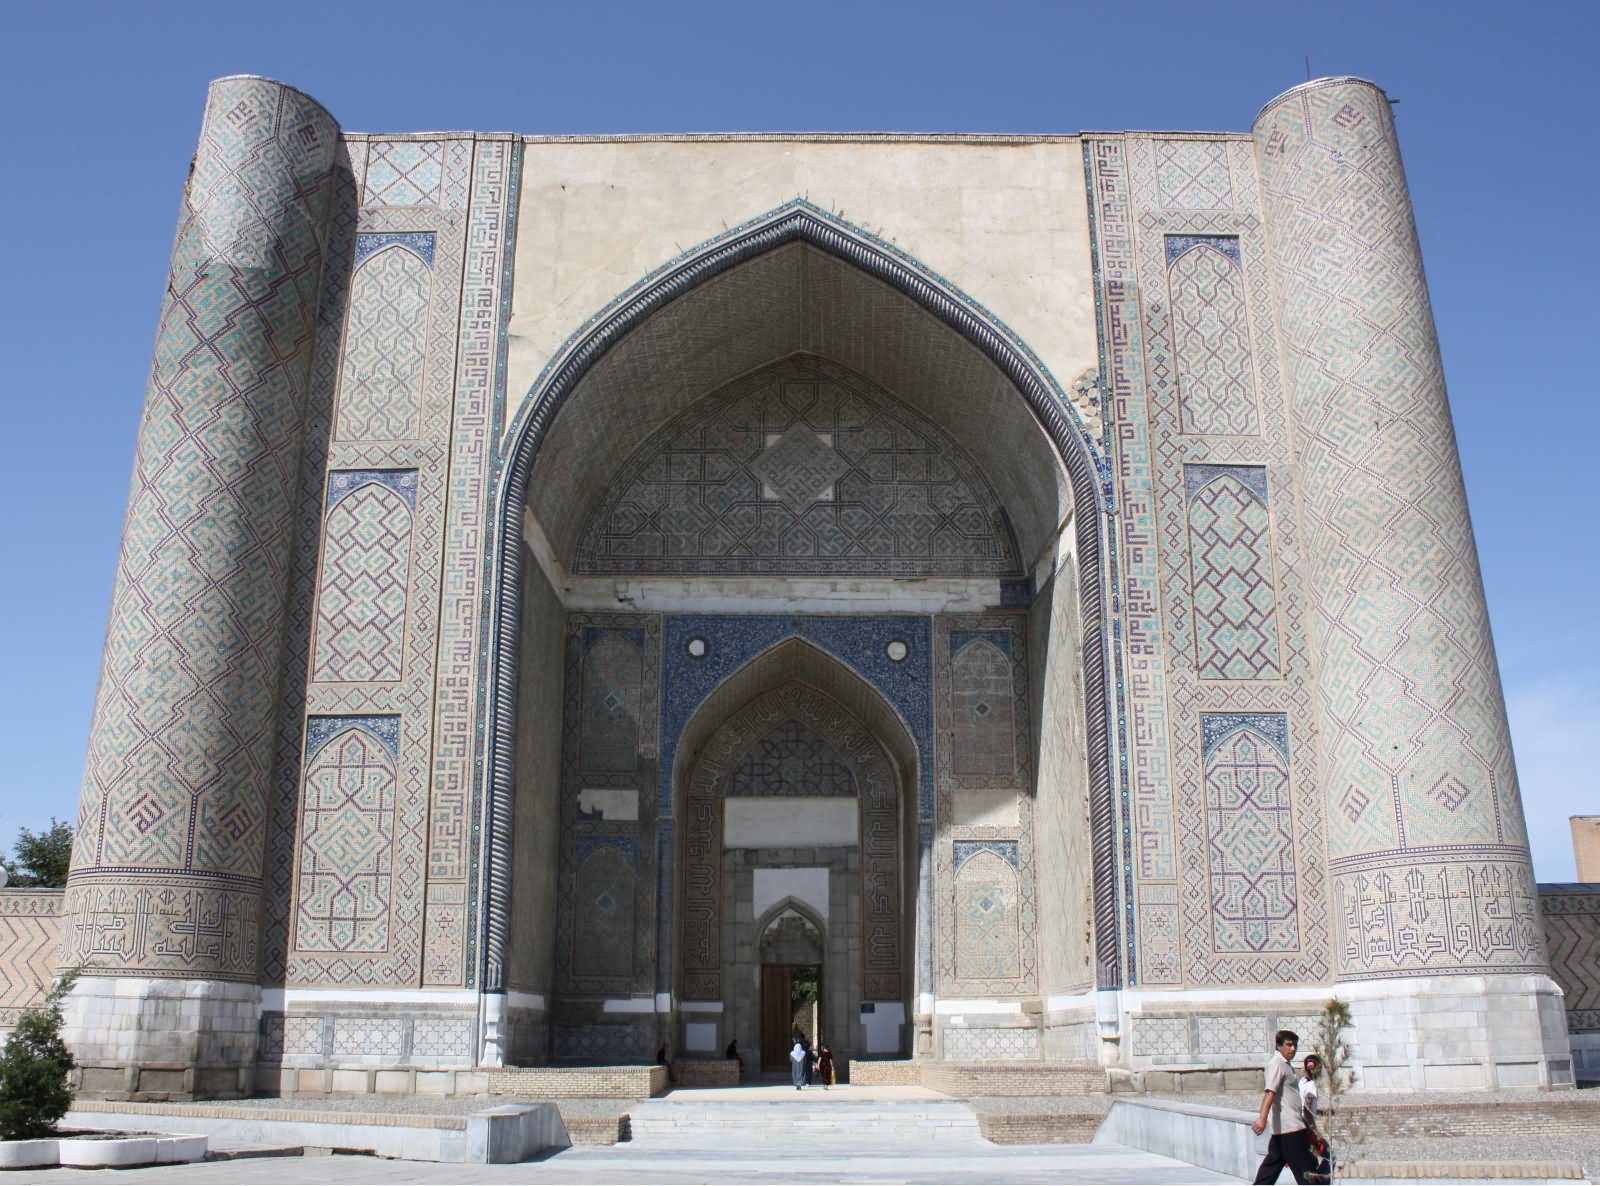 Front View Of The Bibi-Khanym Mosque